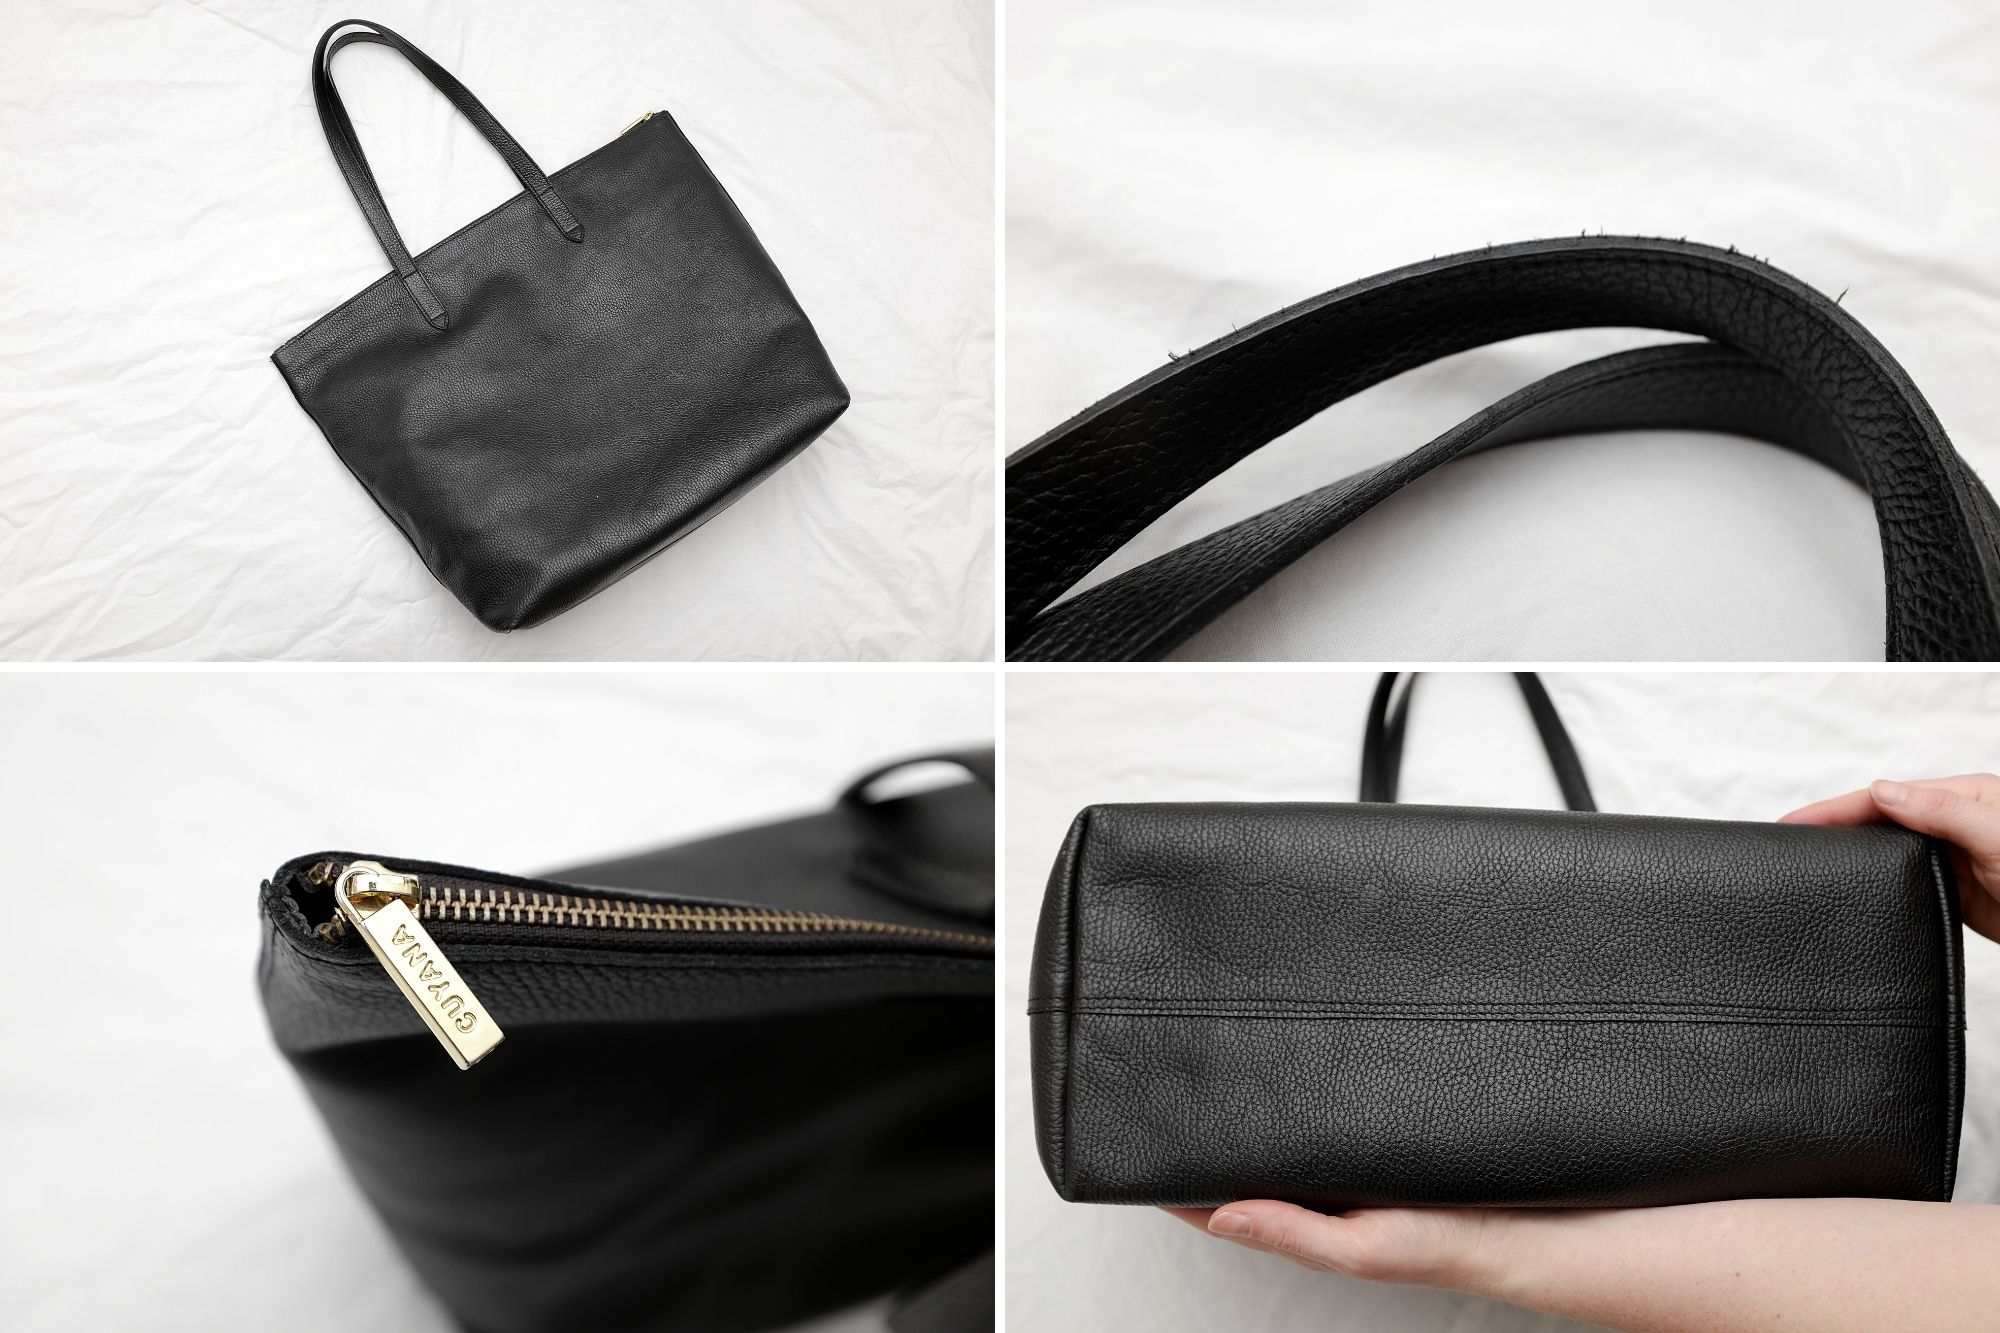 Different angles of the bag against a white backdrop